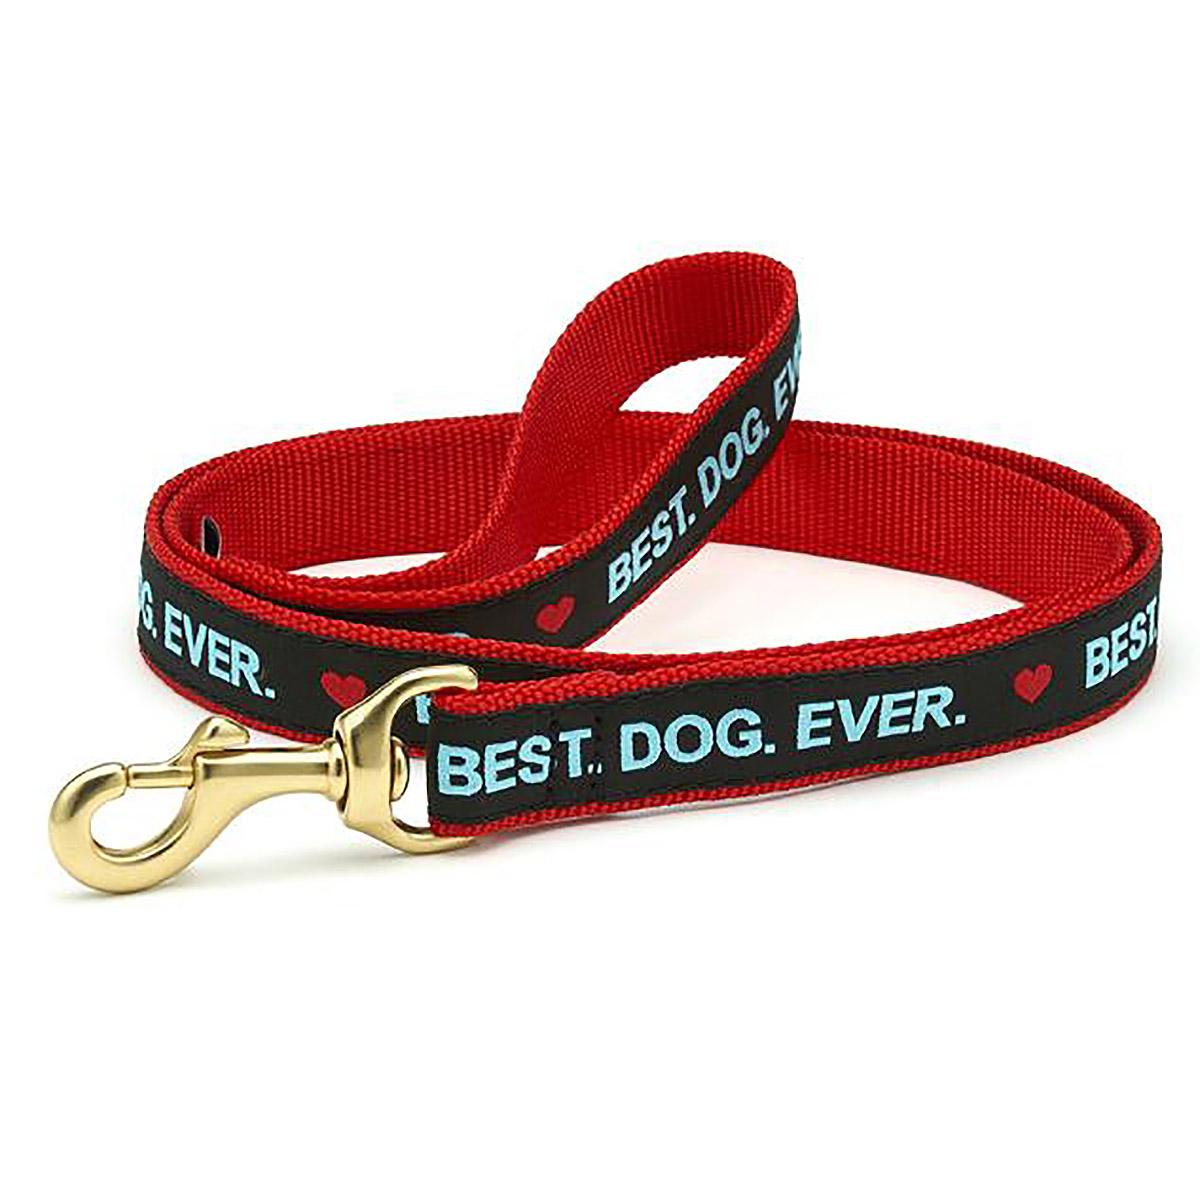 Best. Dog. Ever. Dog Leash by Up Country